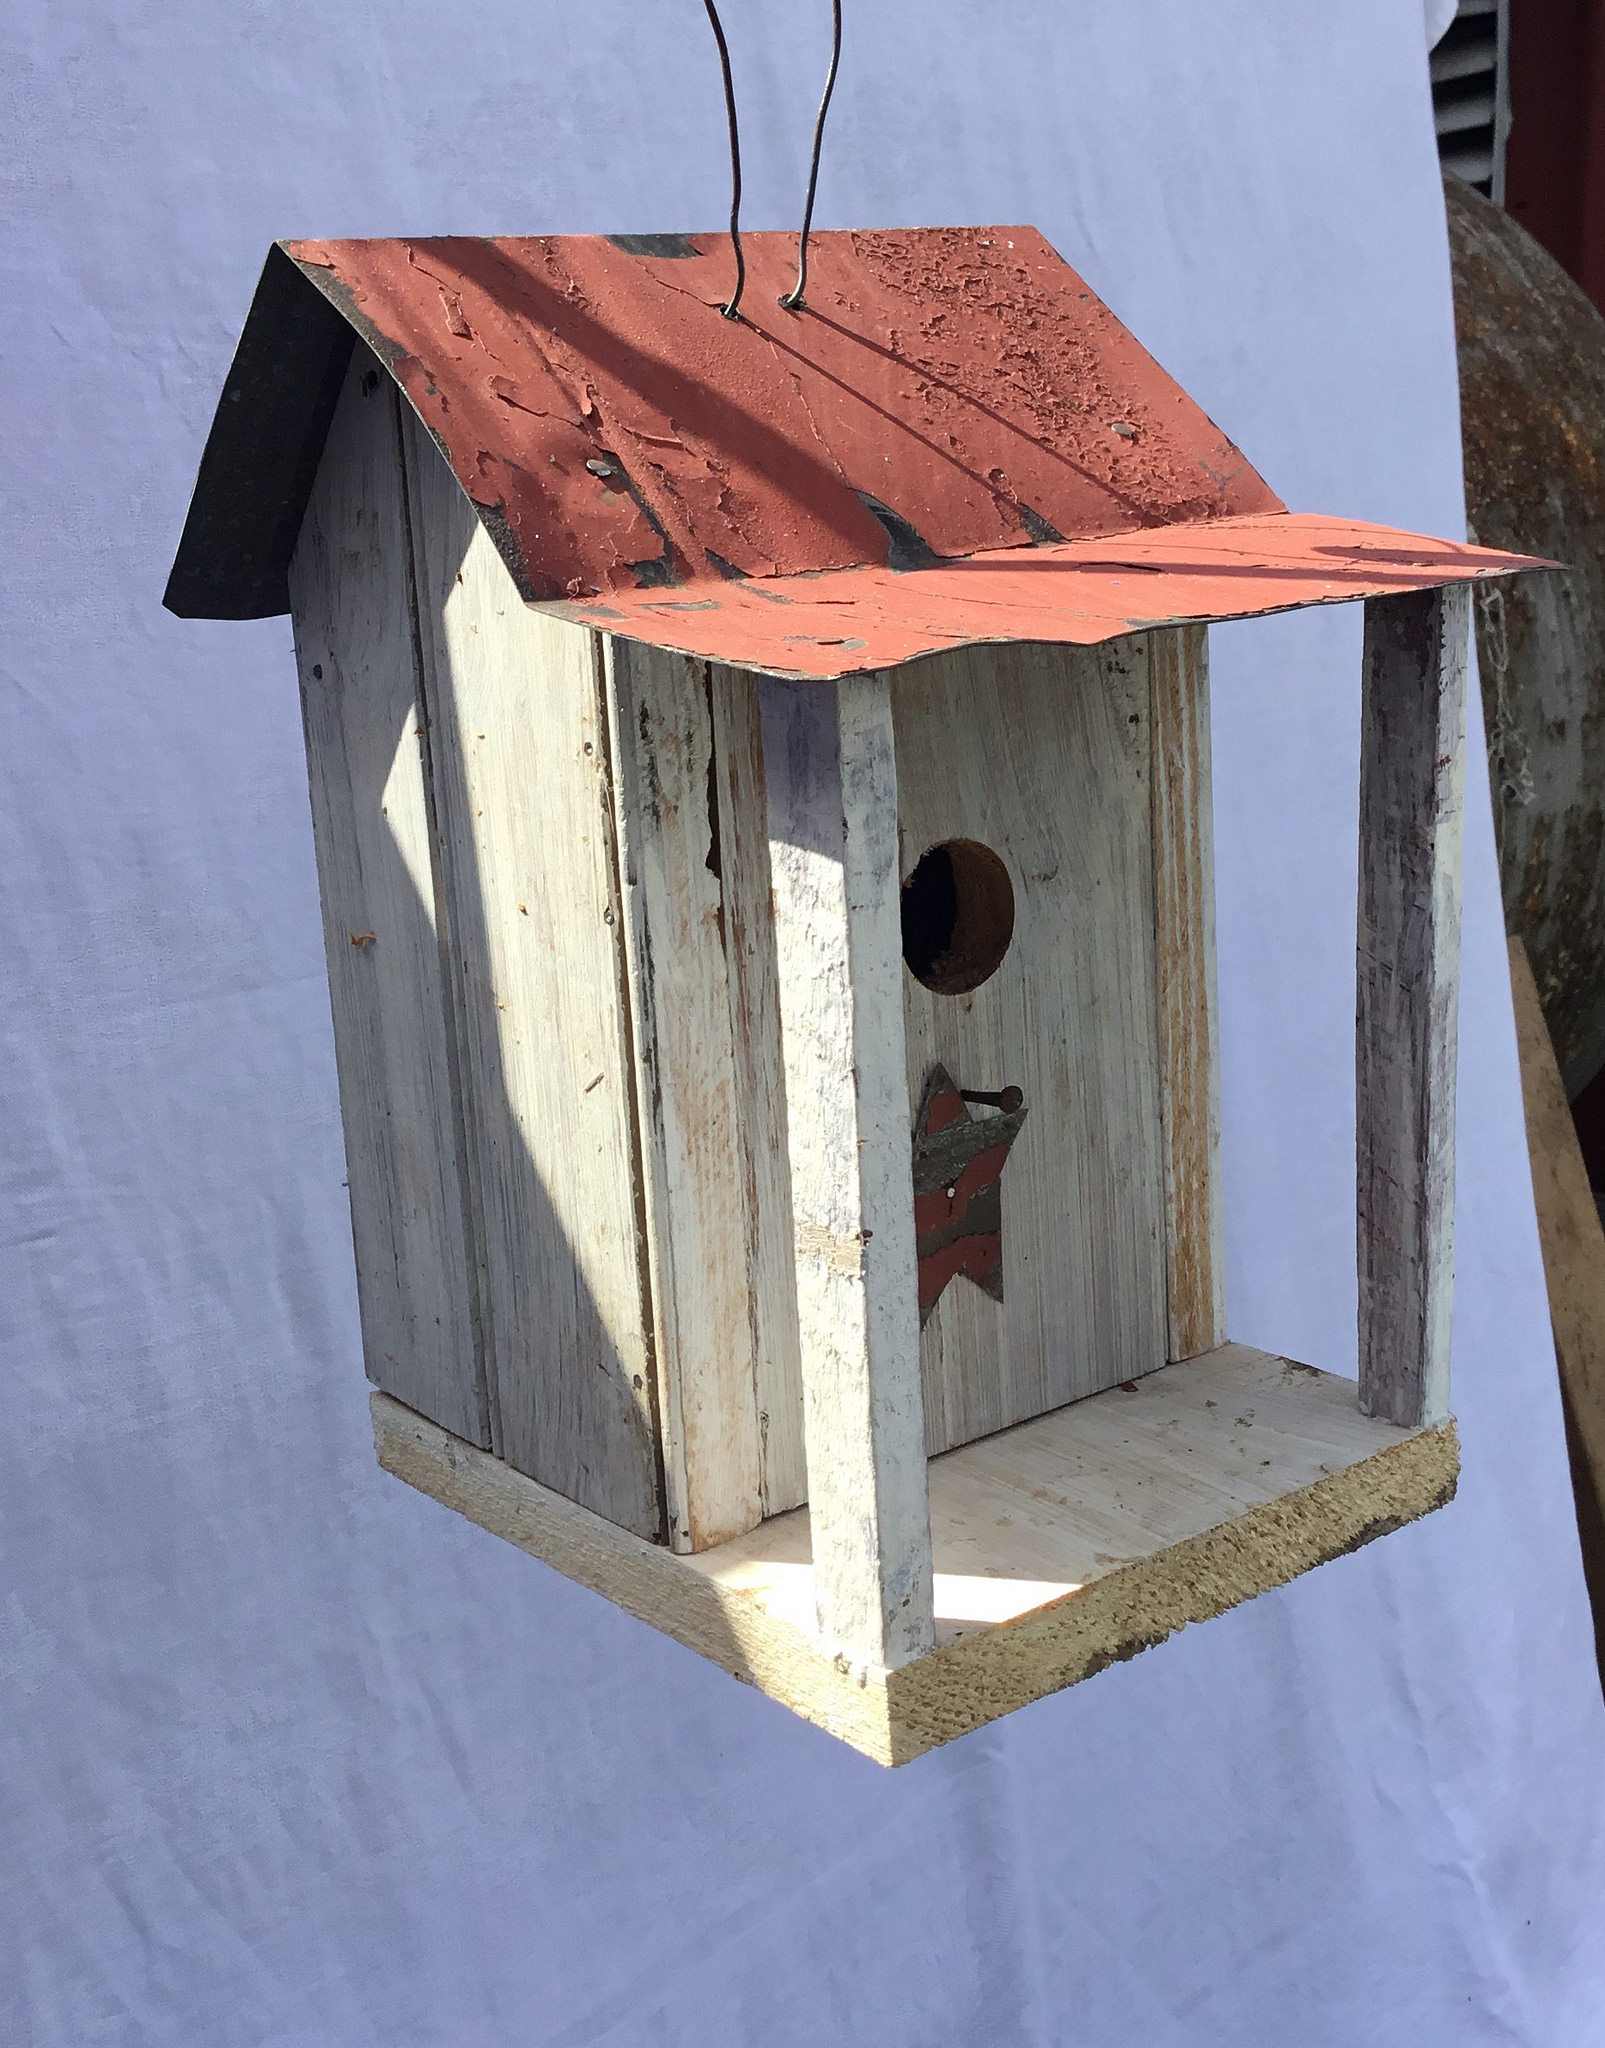 Barn Wood Bird House with Porch - image 2 of 2